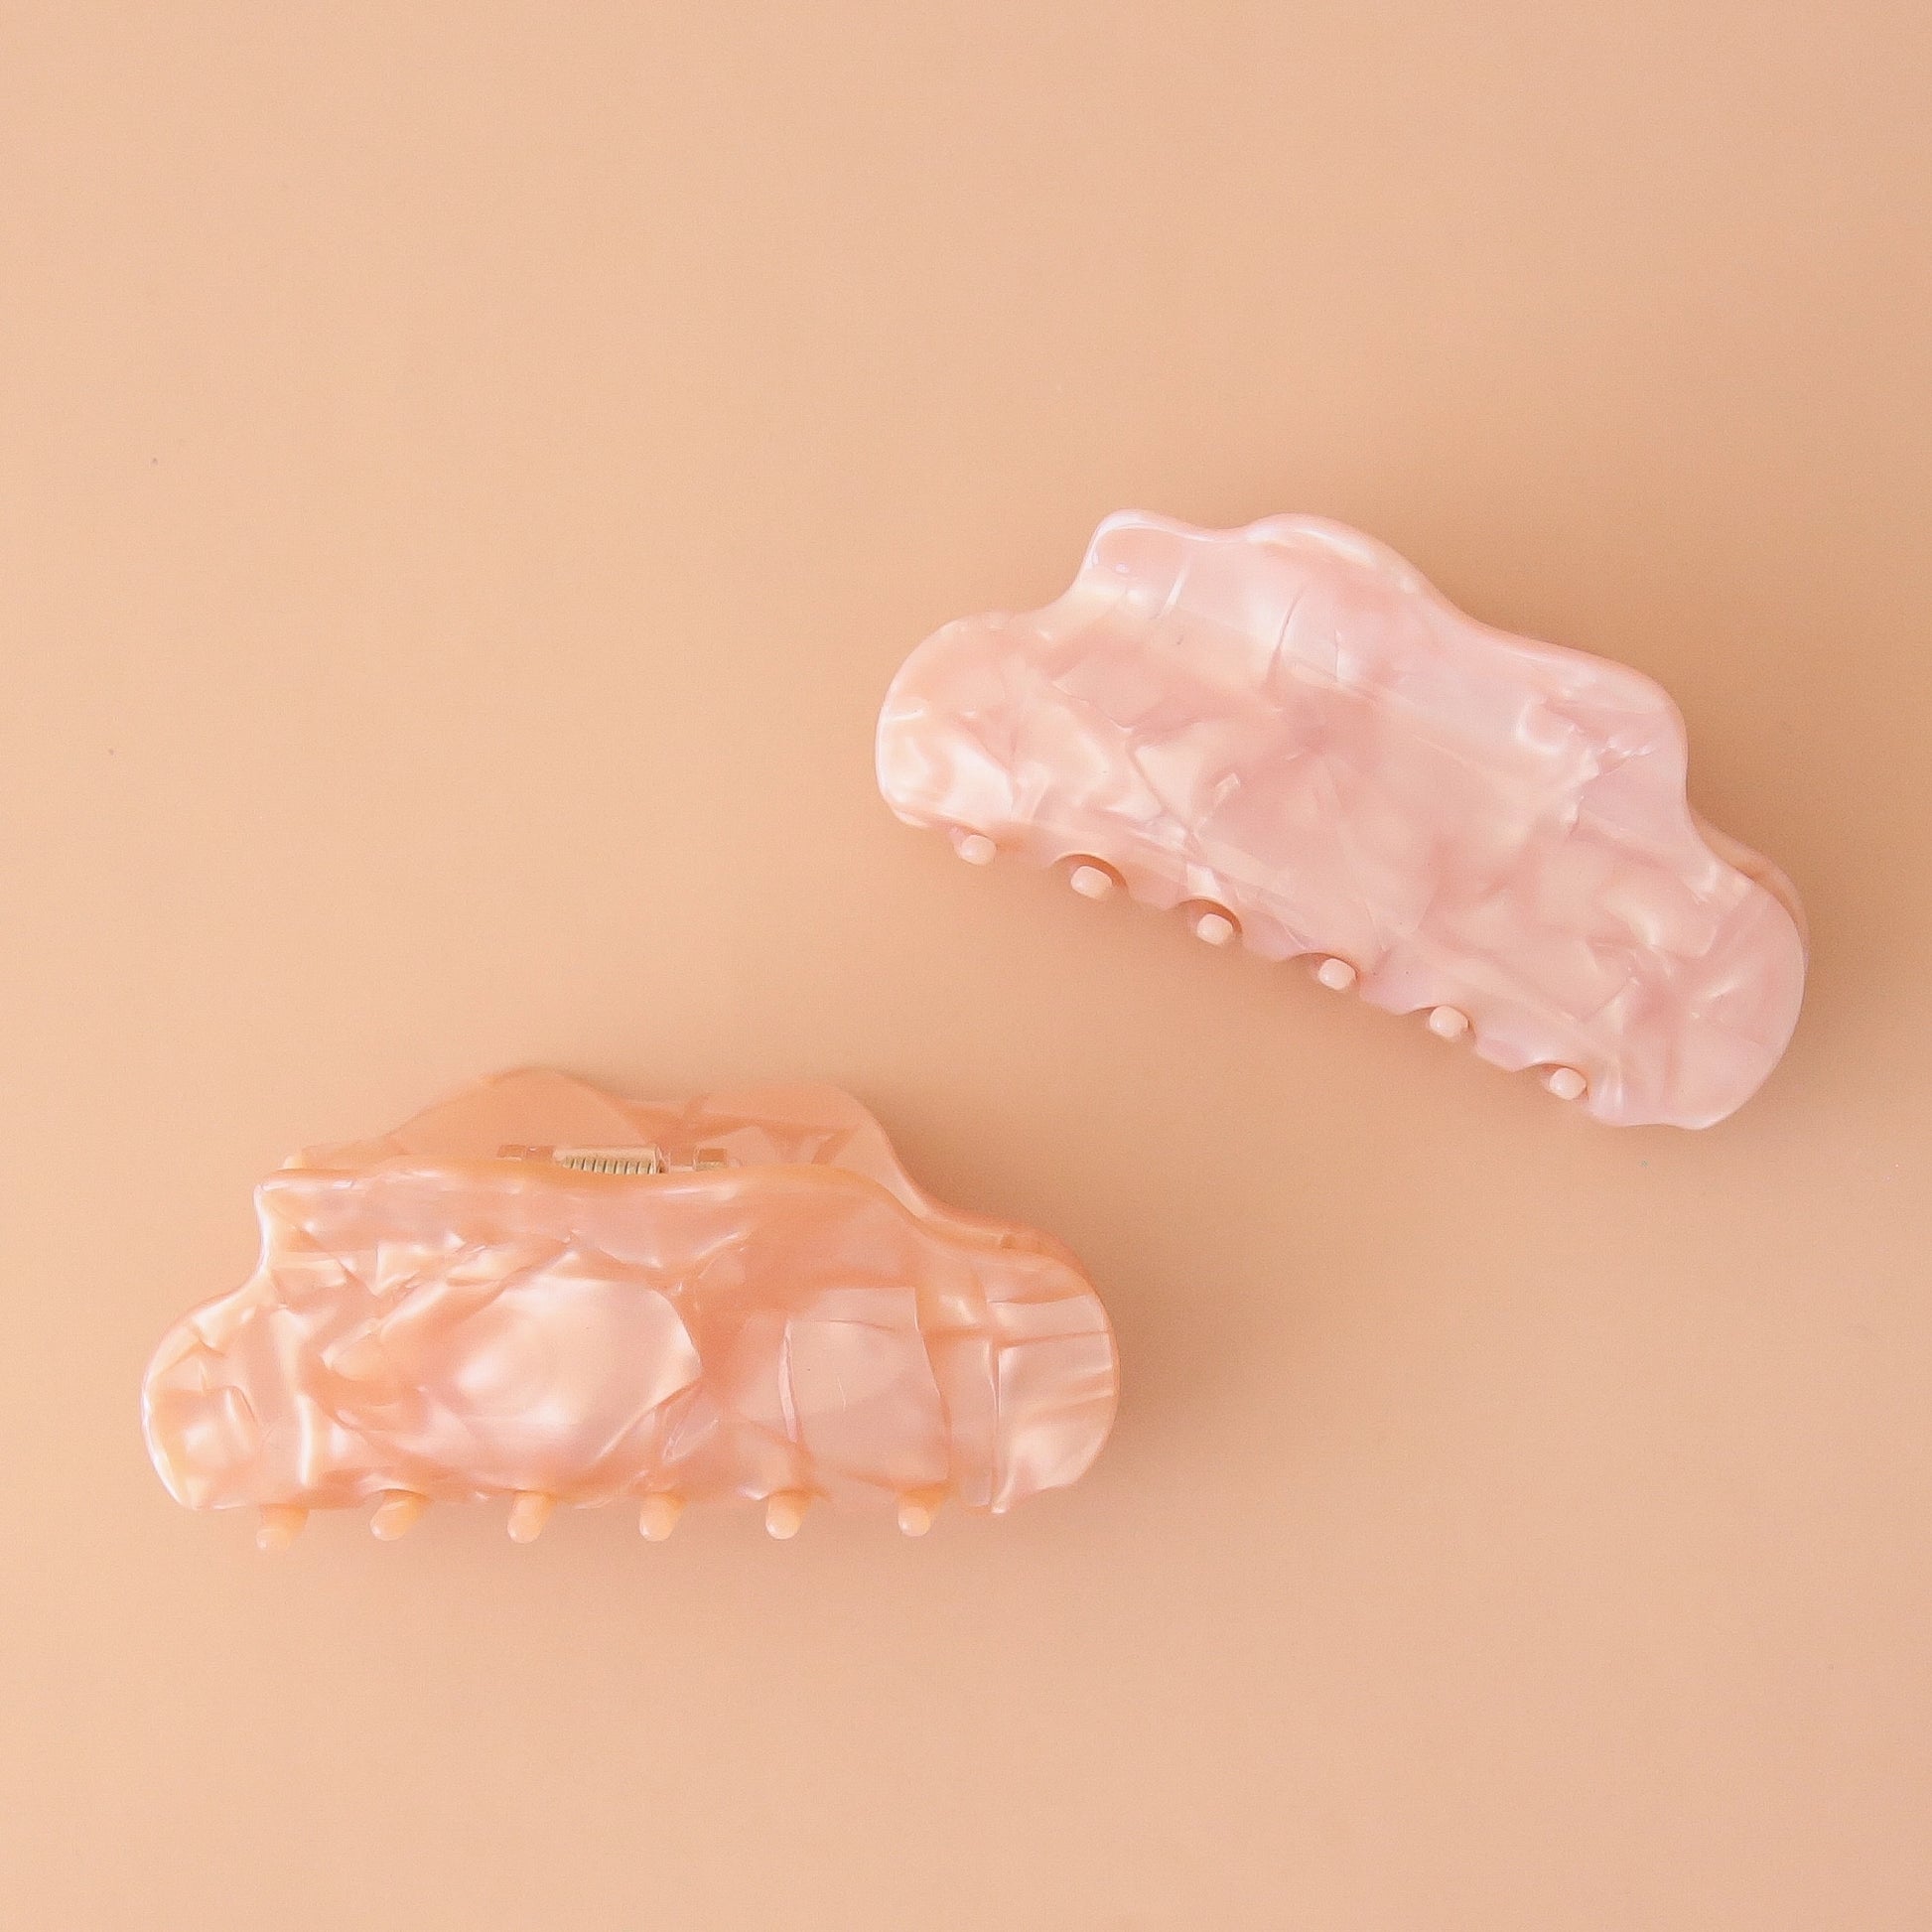 On a peachy background is two shell textured claw clips with a wavy edge detail in a peachy shade and a light pink shade.